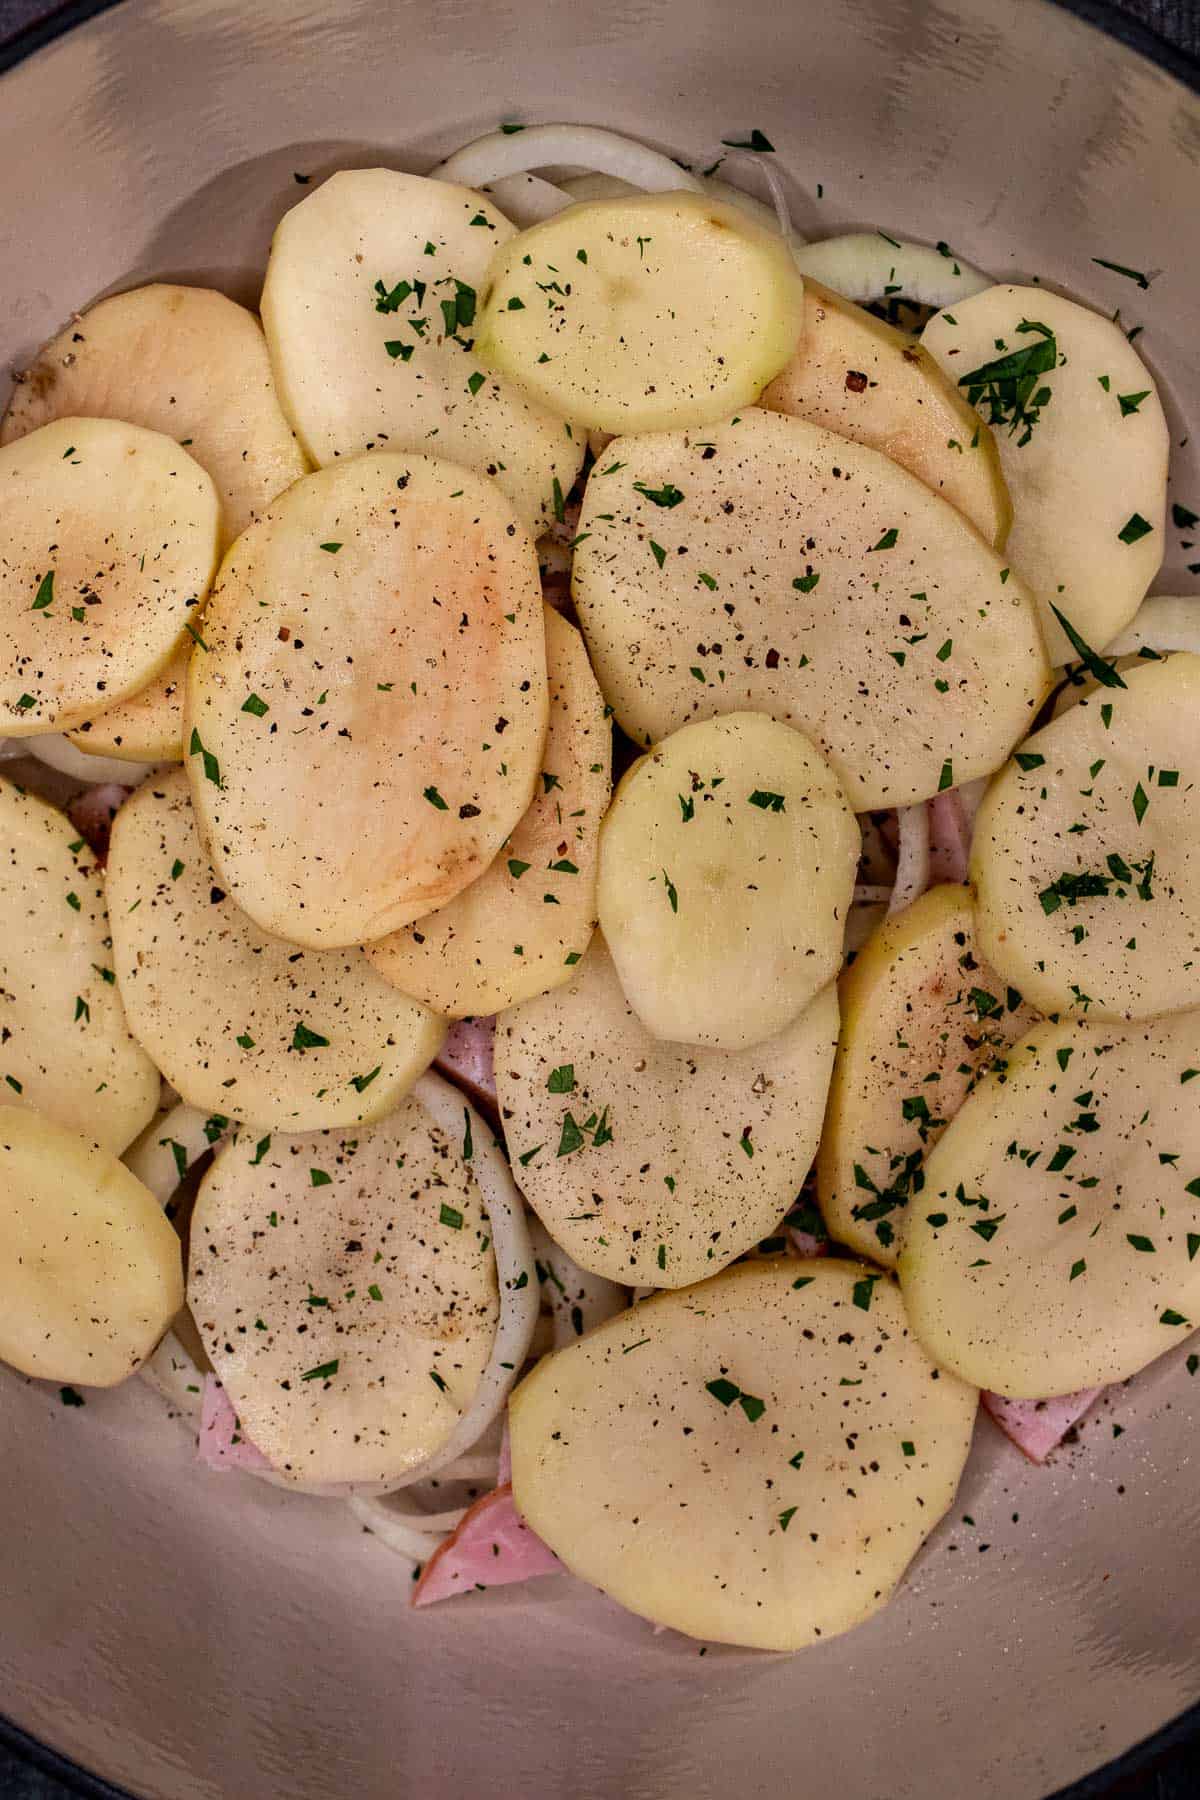 Adding sliced potatoes to the coddle above the onions.